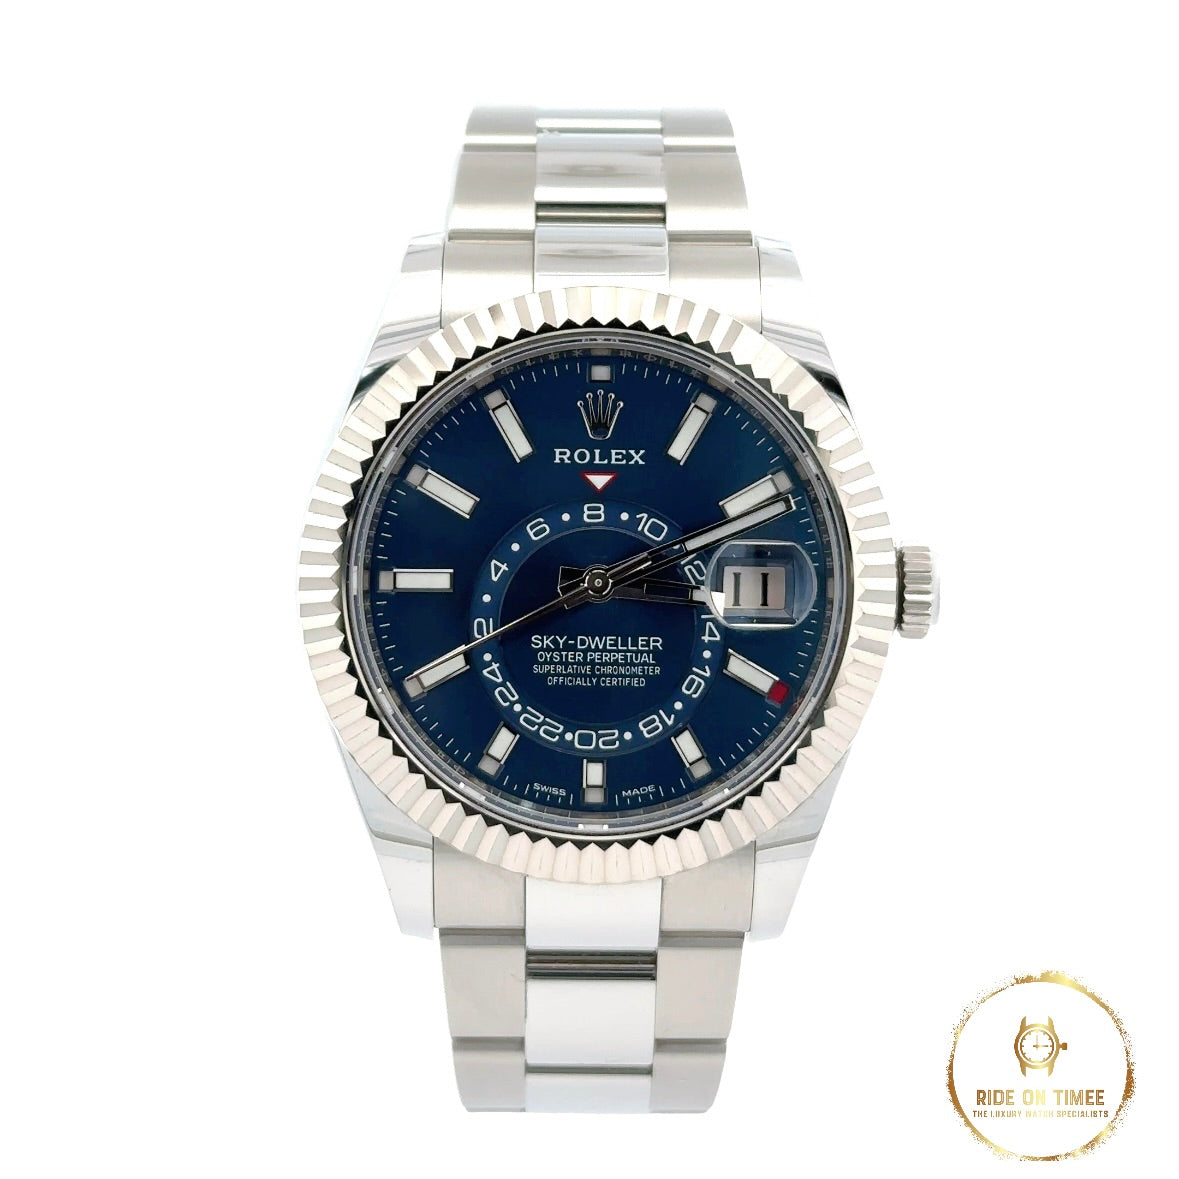 Rolex Sky-Dweller 42 Factory Blue Dial ‘326934’ - Ride On Timee